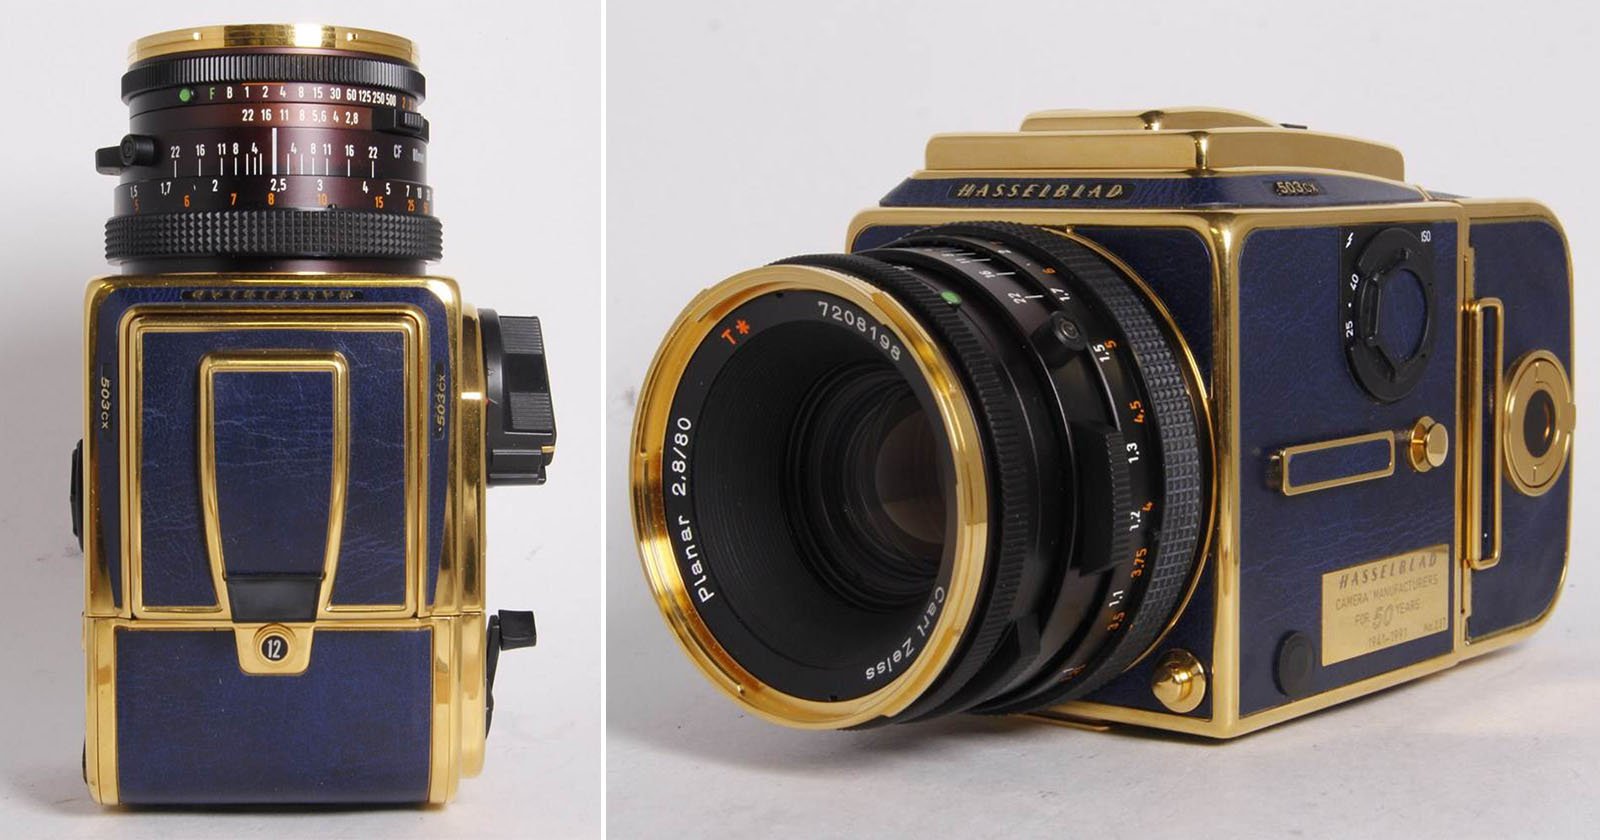  rare 33-year-old blue gold hasselblad camera appears 